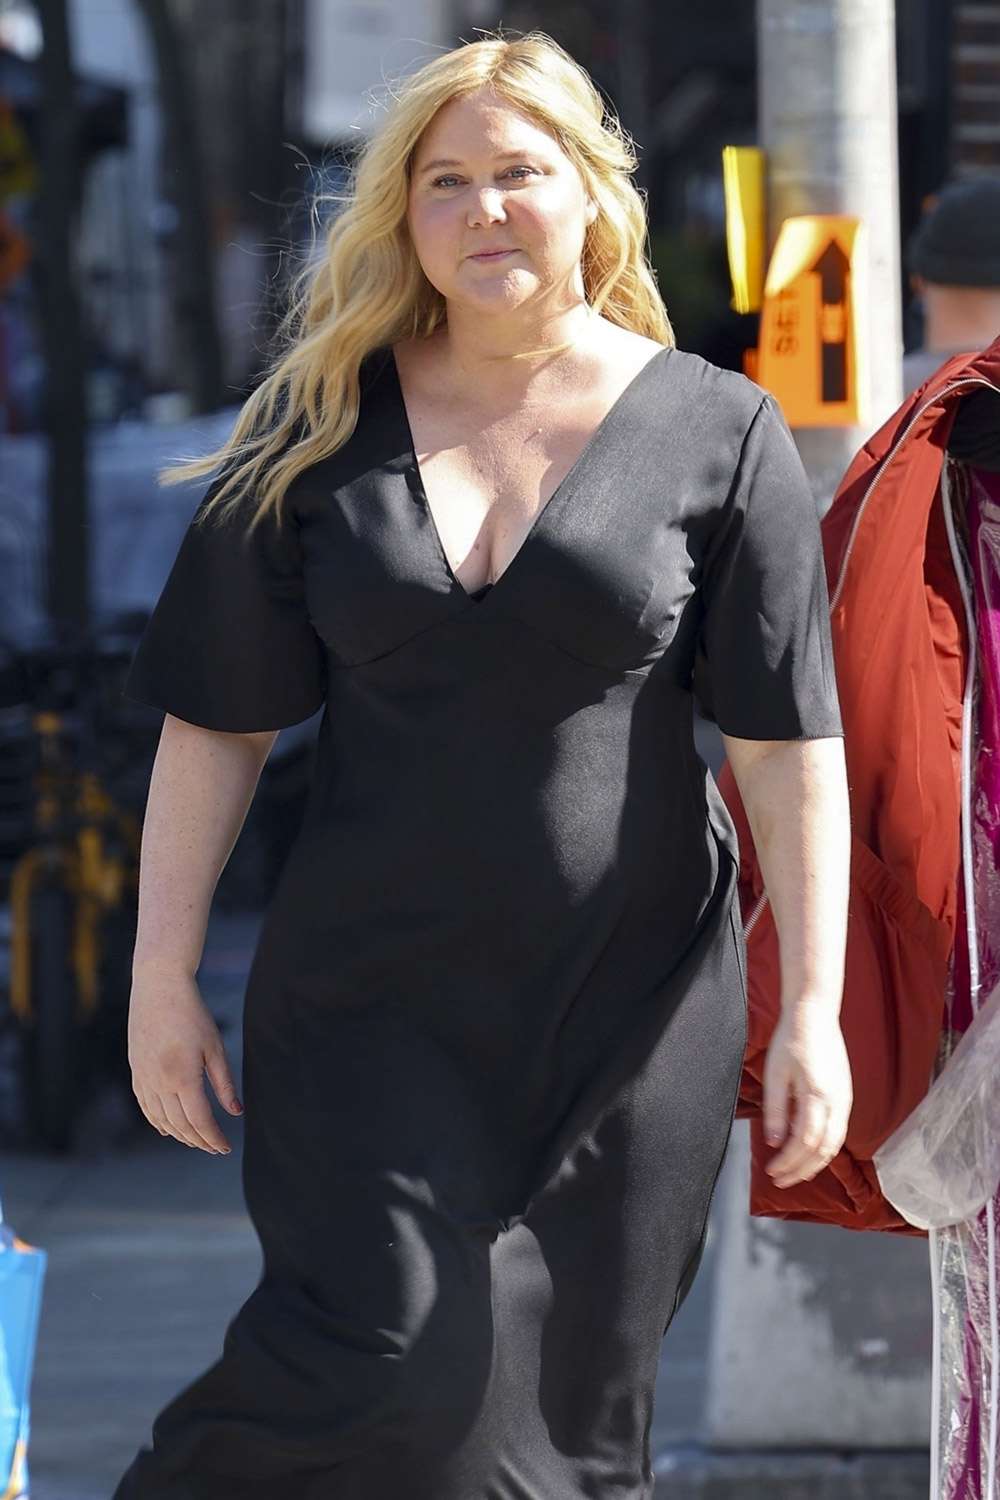 Amy Schumer spotted filming "Kinda Pregnant" on NYC streets after recently opening up about Cushing Syndrome diagnosis